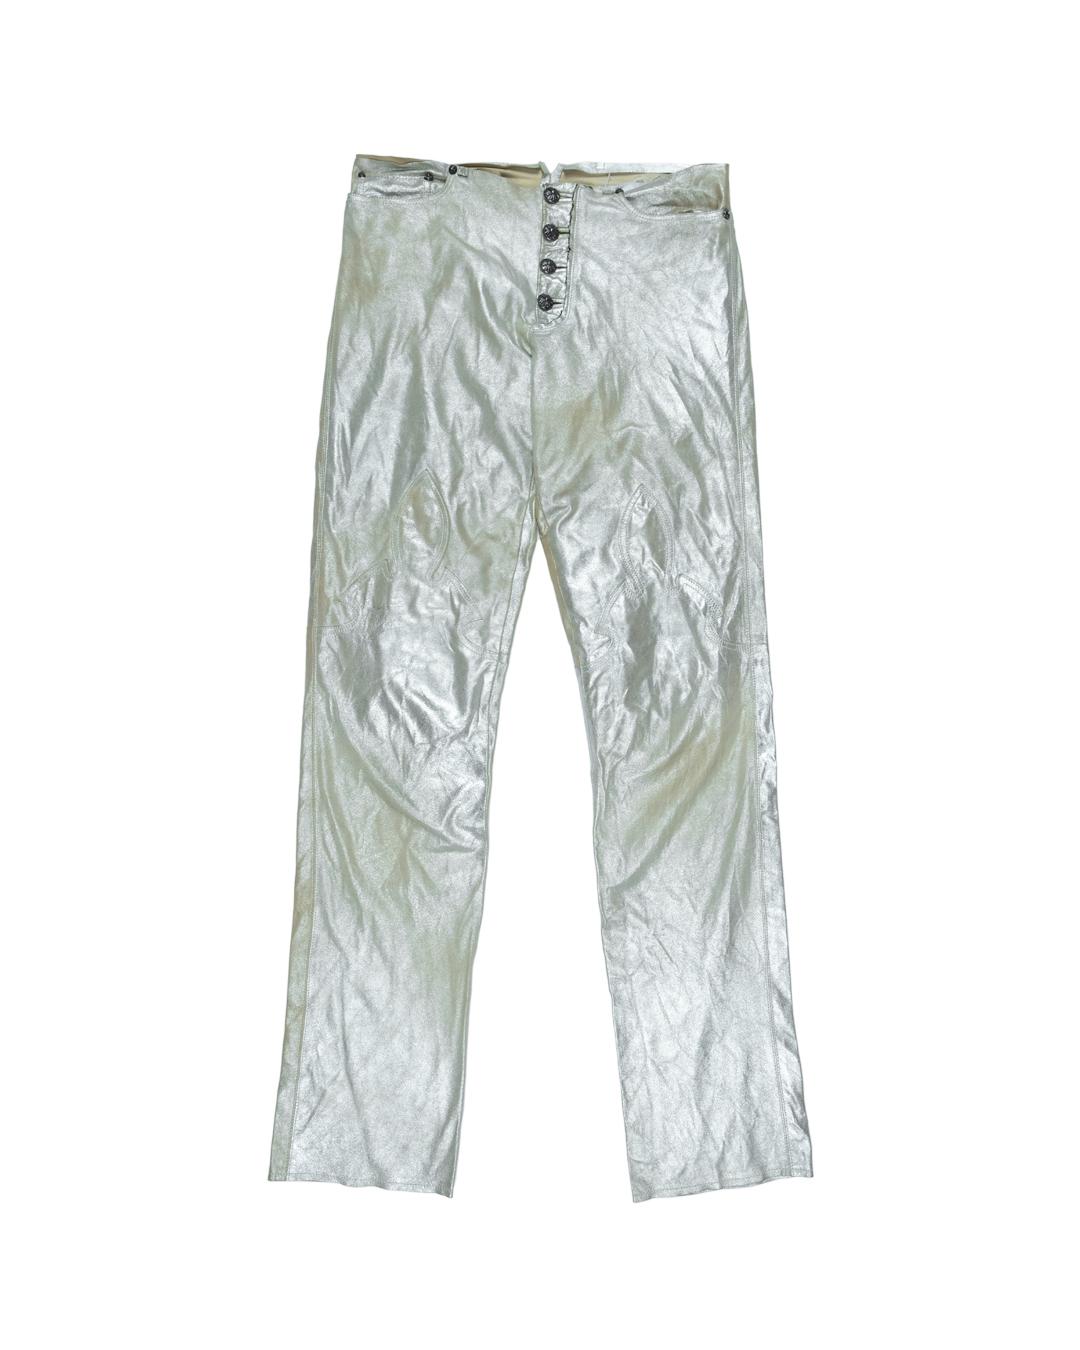 These stunning pants come from the very early days of Chrome Hearts, before their transition into the billion dollar marketing powerhouse they are today. They are from an era when Richard Stark was running the label off the genesis of an idea given